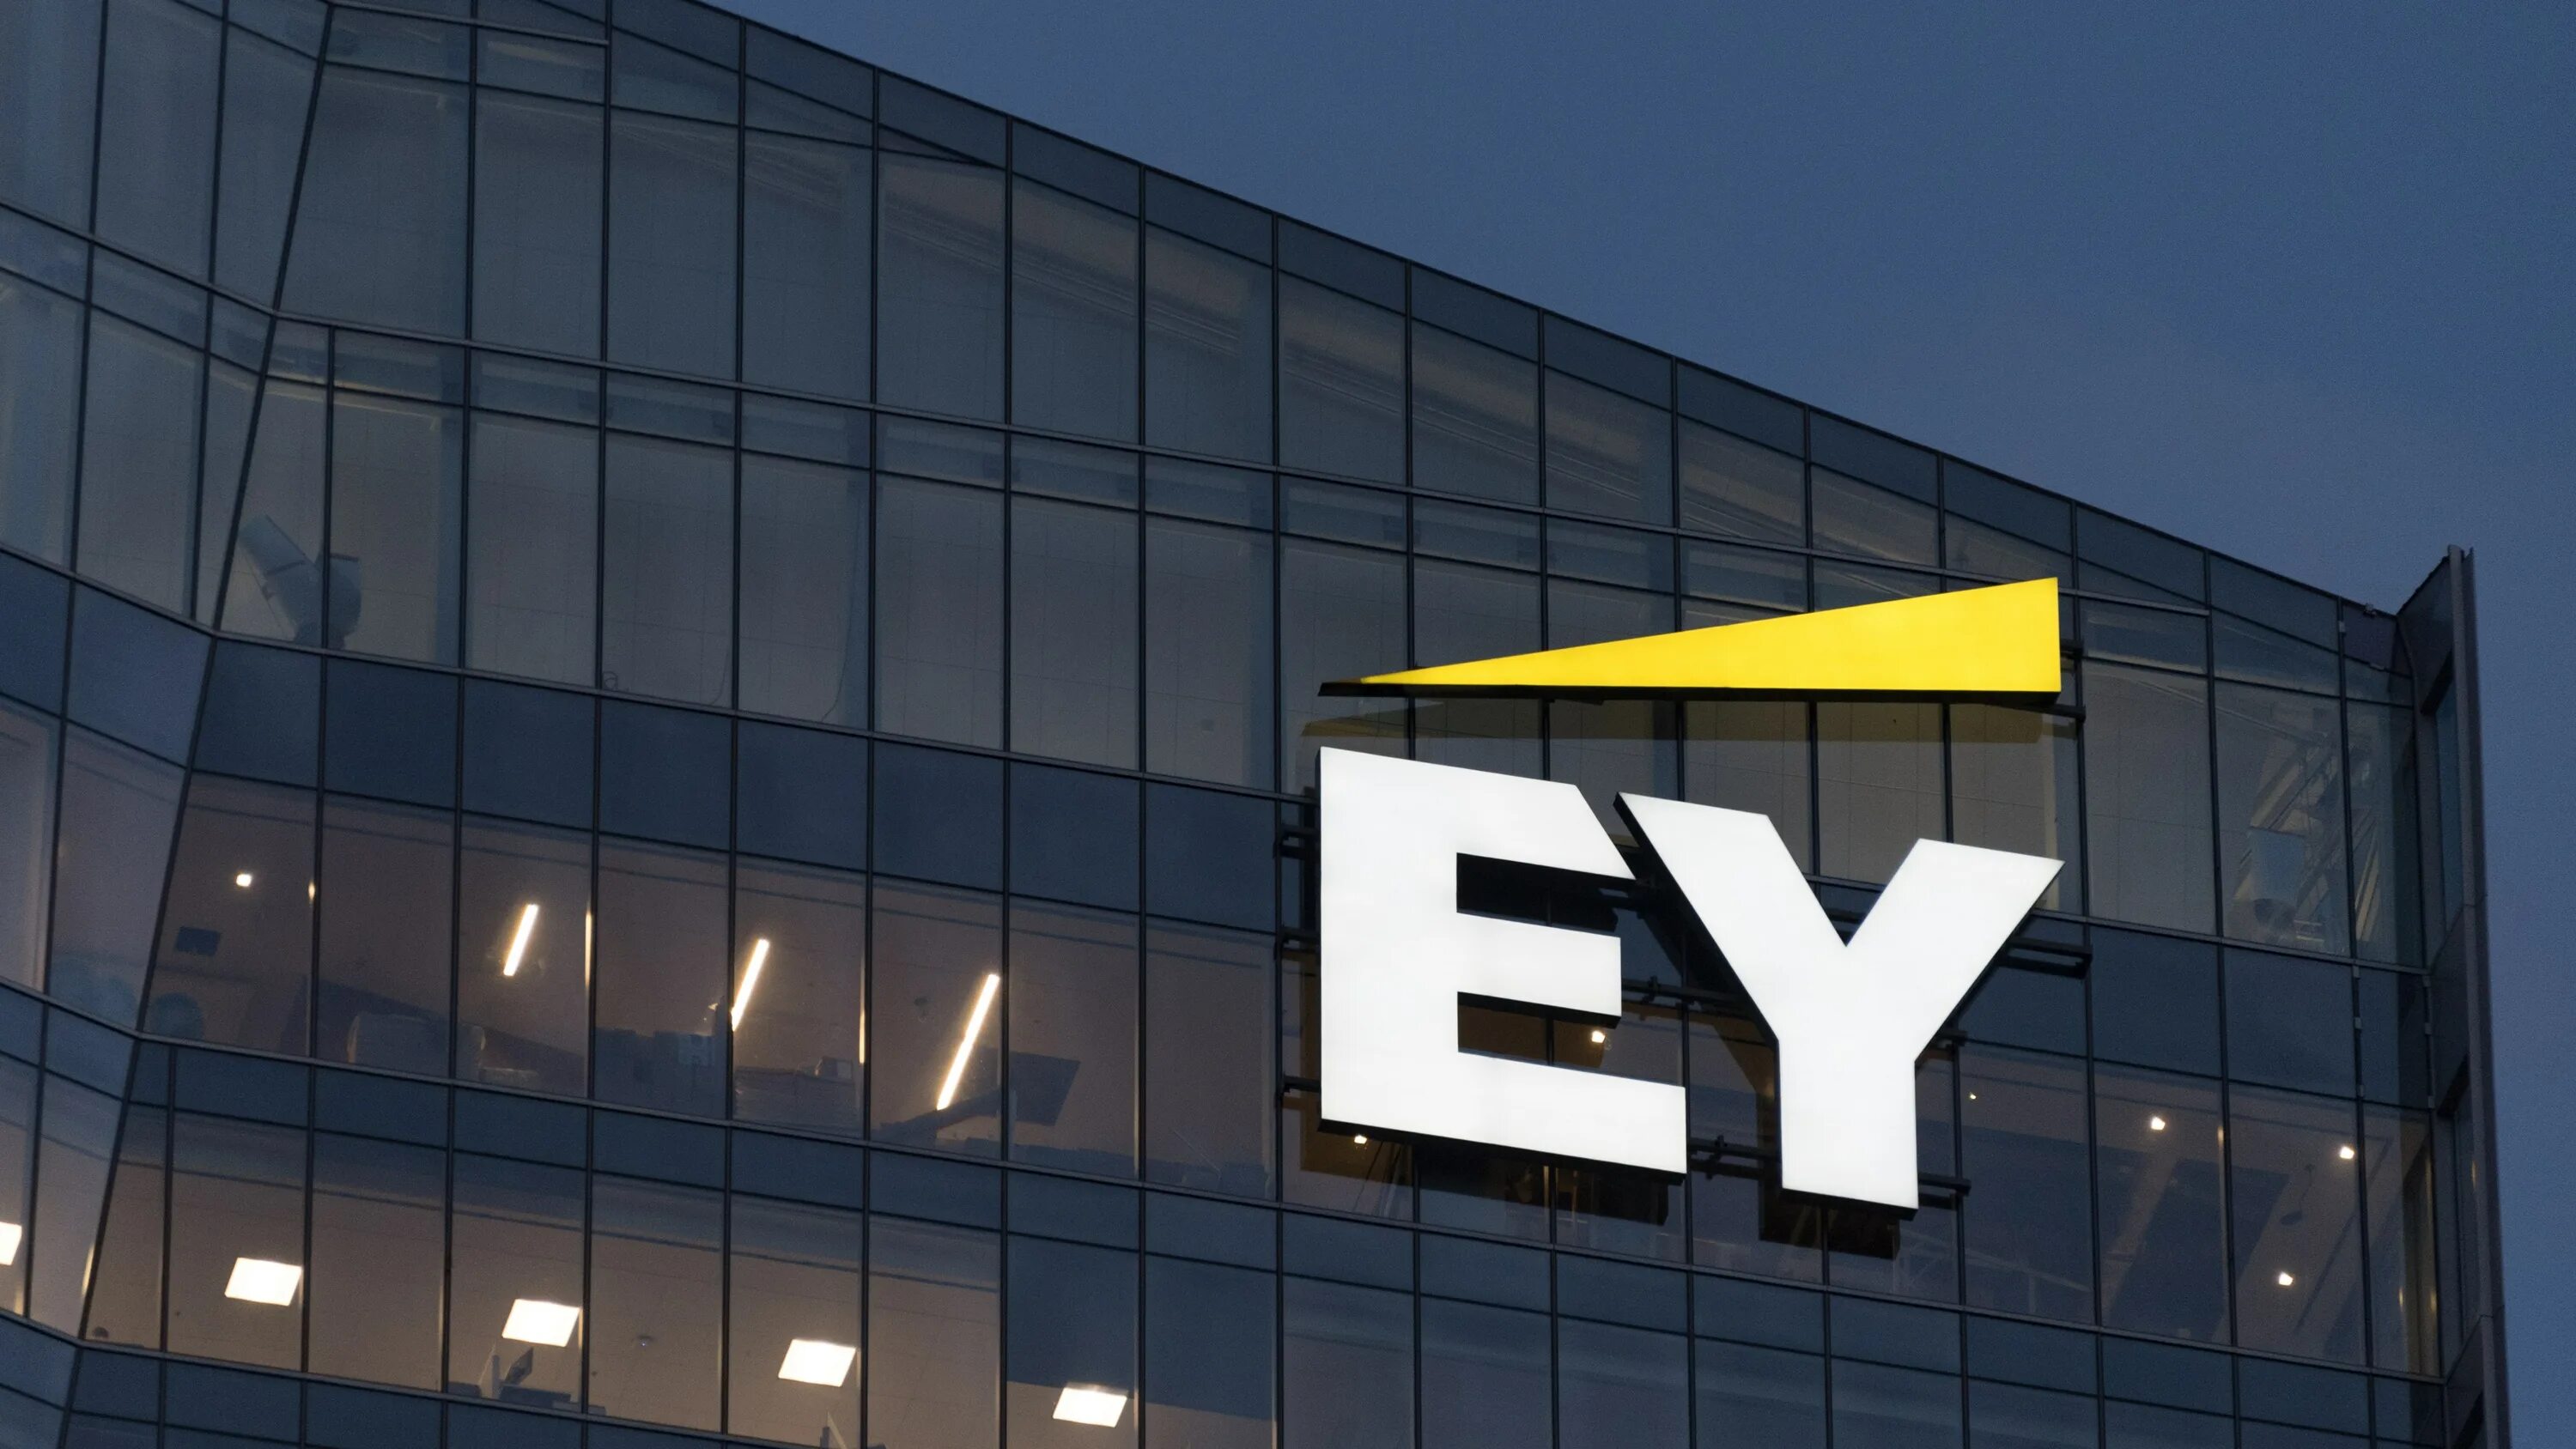 Ernst & young (Ey). Ernst young компания Москва. Ernst & young Global Limited. Ernst young логотип. Issue company